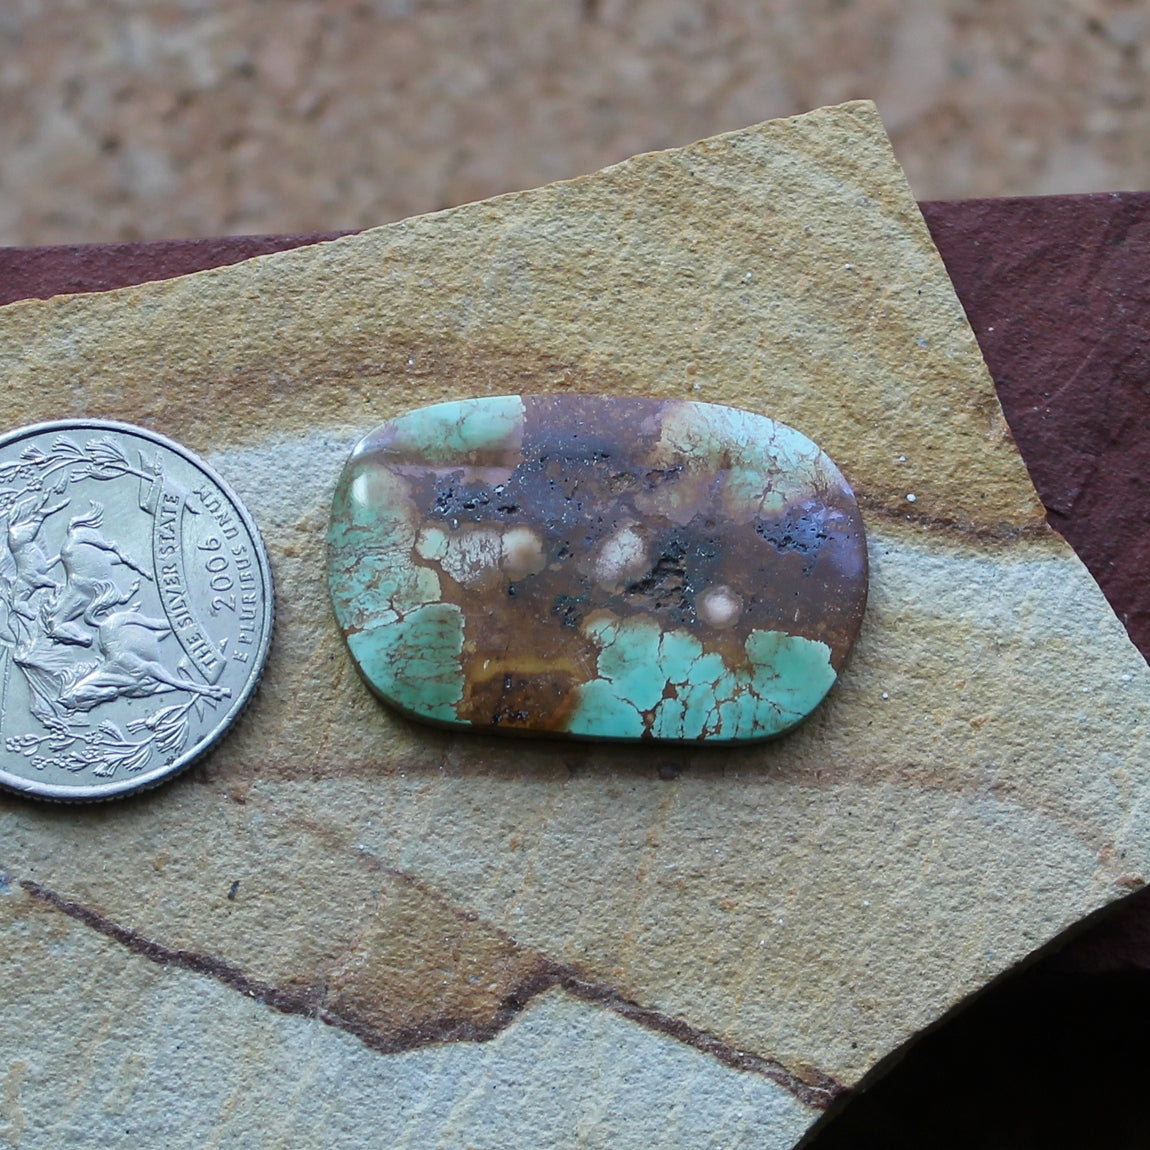 21 carat green Stone Mountain Turquoise flat-top cabochon with red inclusions